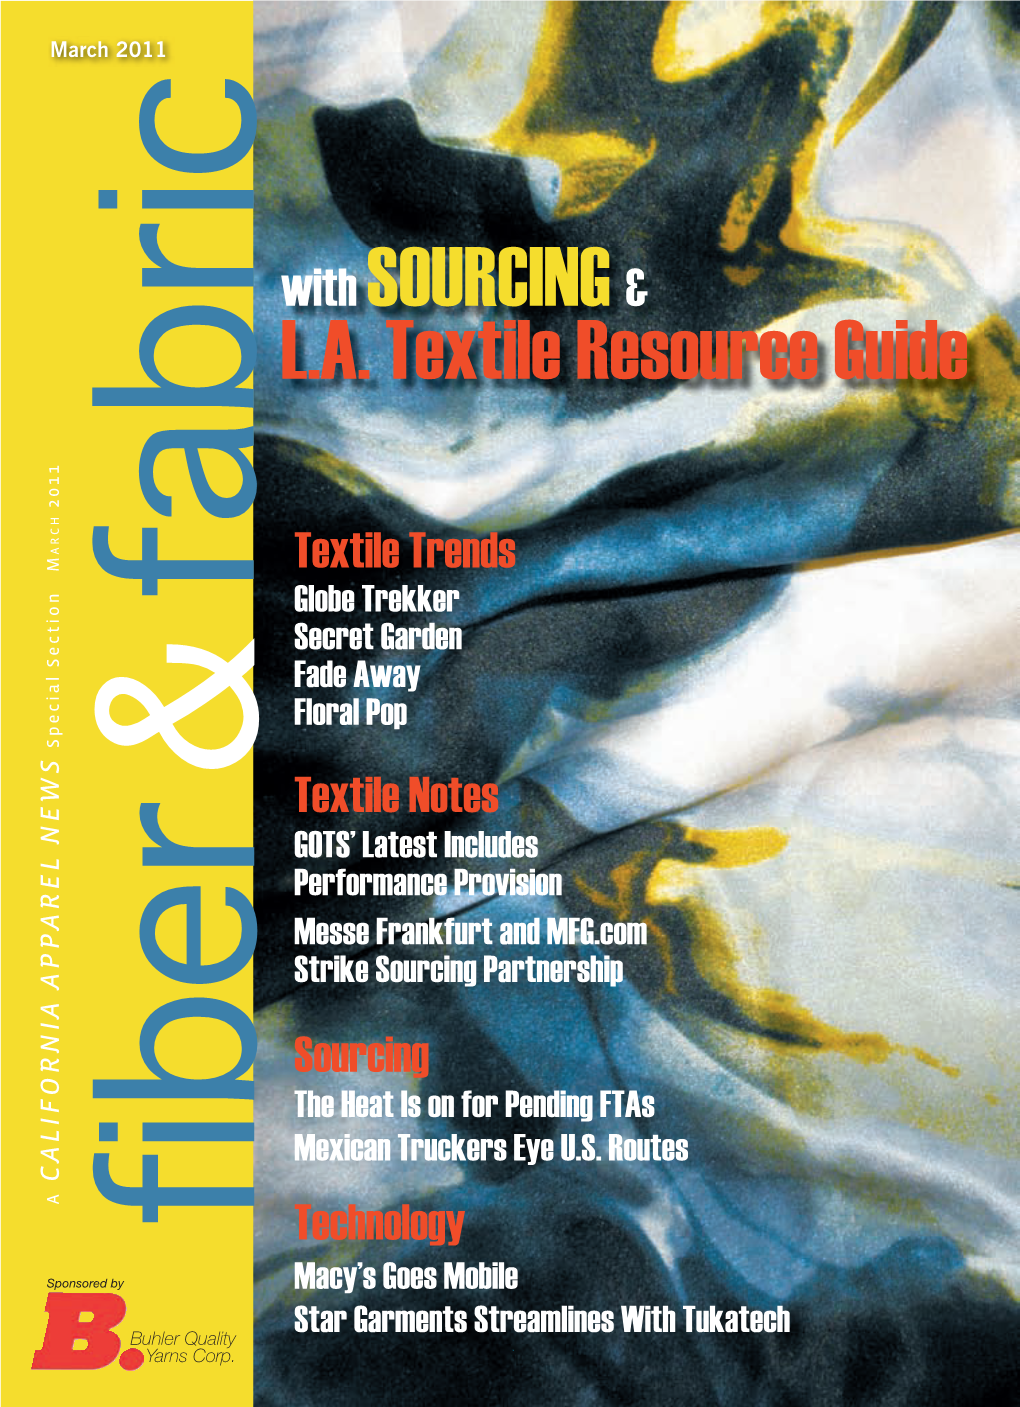 With SOURCING& L.A. Textile Resource Guide